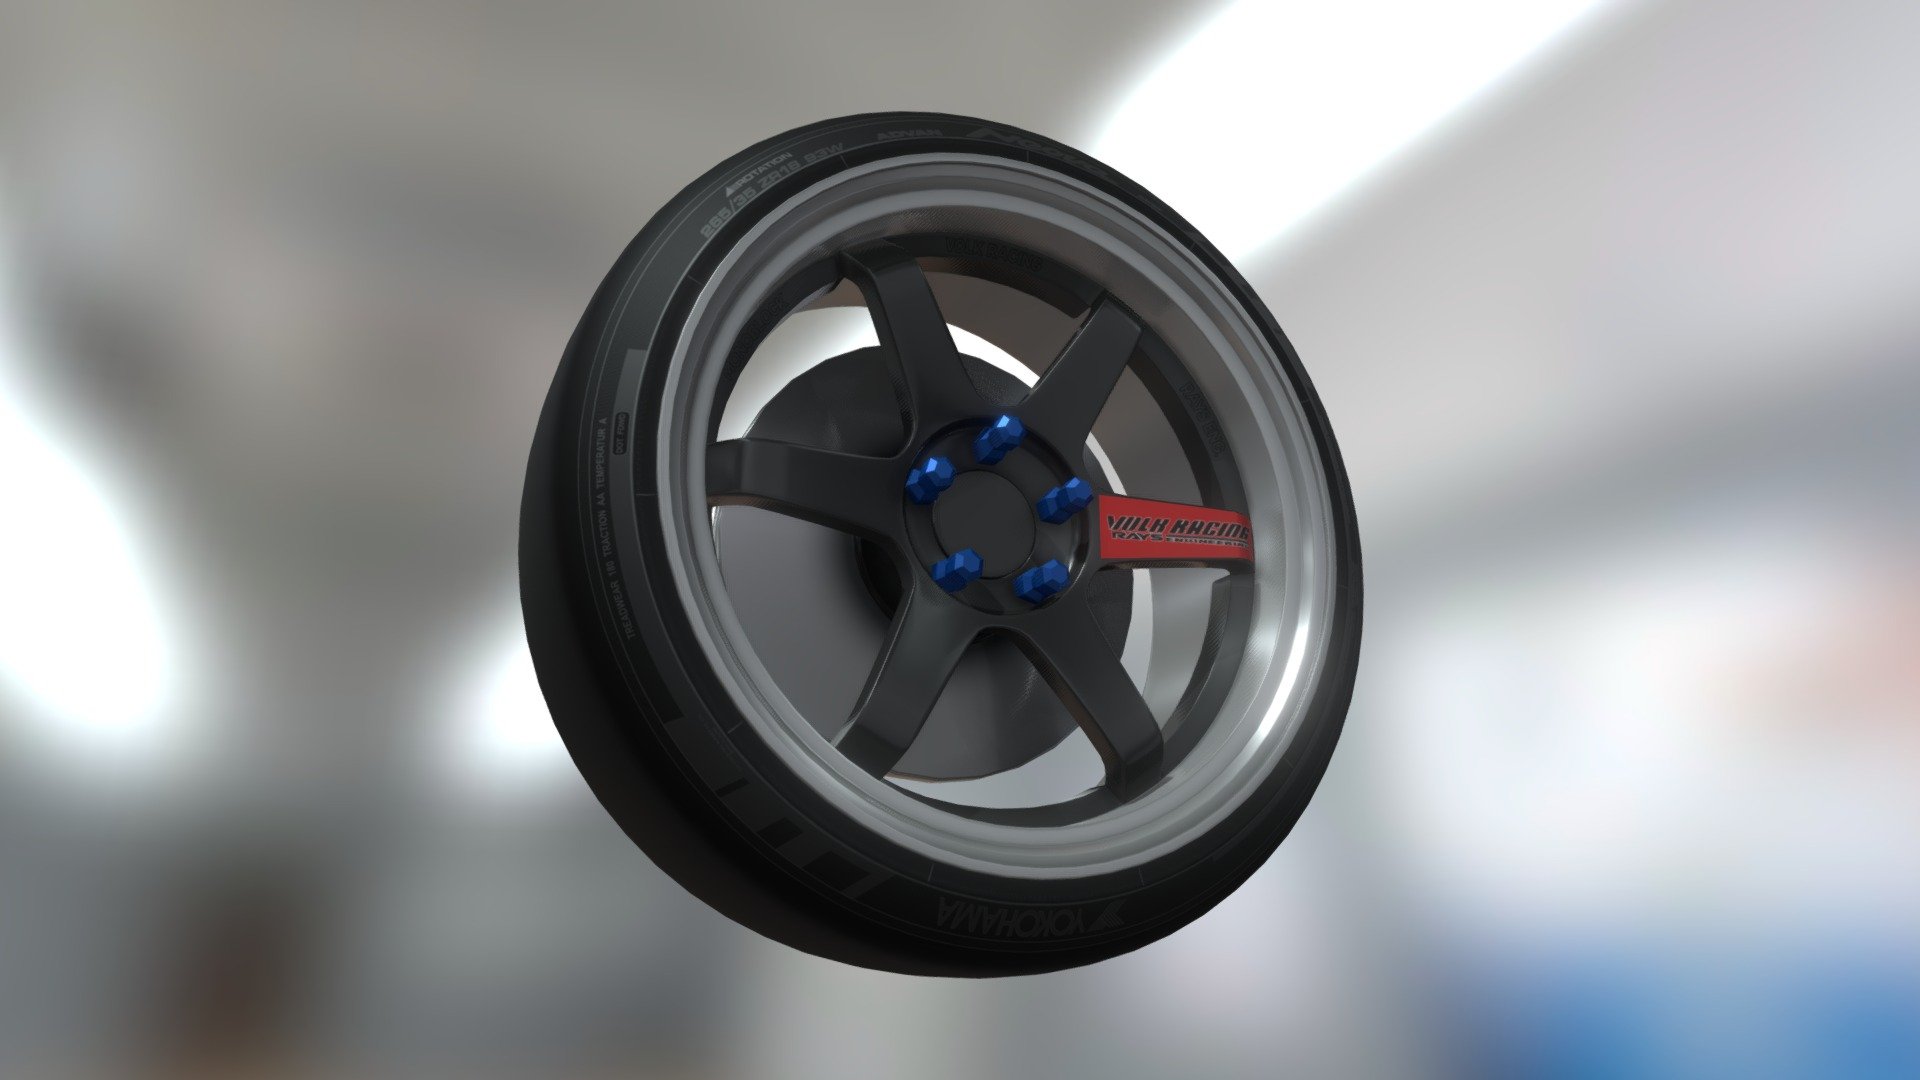 confused about what kind of wheel i want to make.. Savini is kinda hard so i do TE37 SL instead

kinda game-ready model, especially GTA SA, the vertices are less than 20k so its fine

if you want to downoad it. you can click/copy this link
https://drive.google.com/file/d/1hx0WQt60Wj3Twto00CcEcha5KdIWVDWW/view?usp=sharing

it contain different texture - Volk TE37 SL - 3D model by blakebella (@blake2theback) 3d model